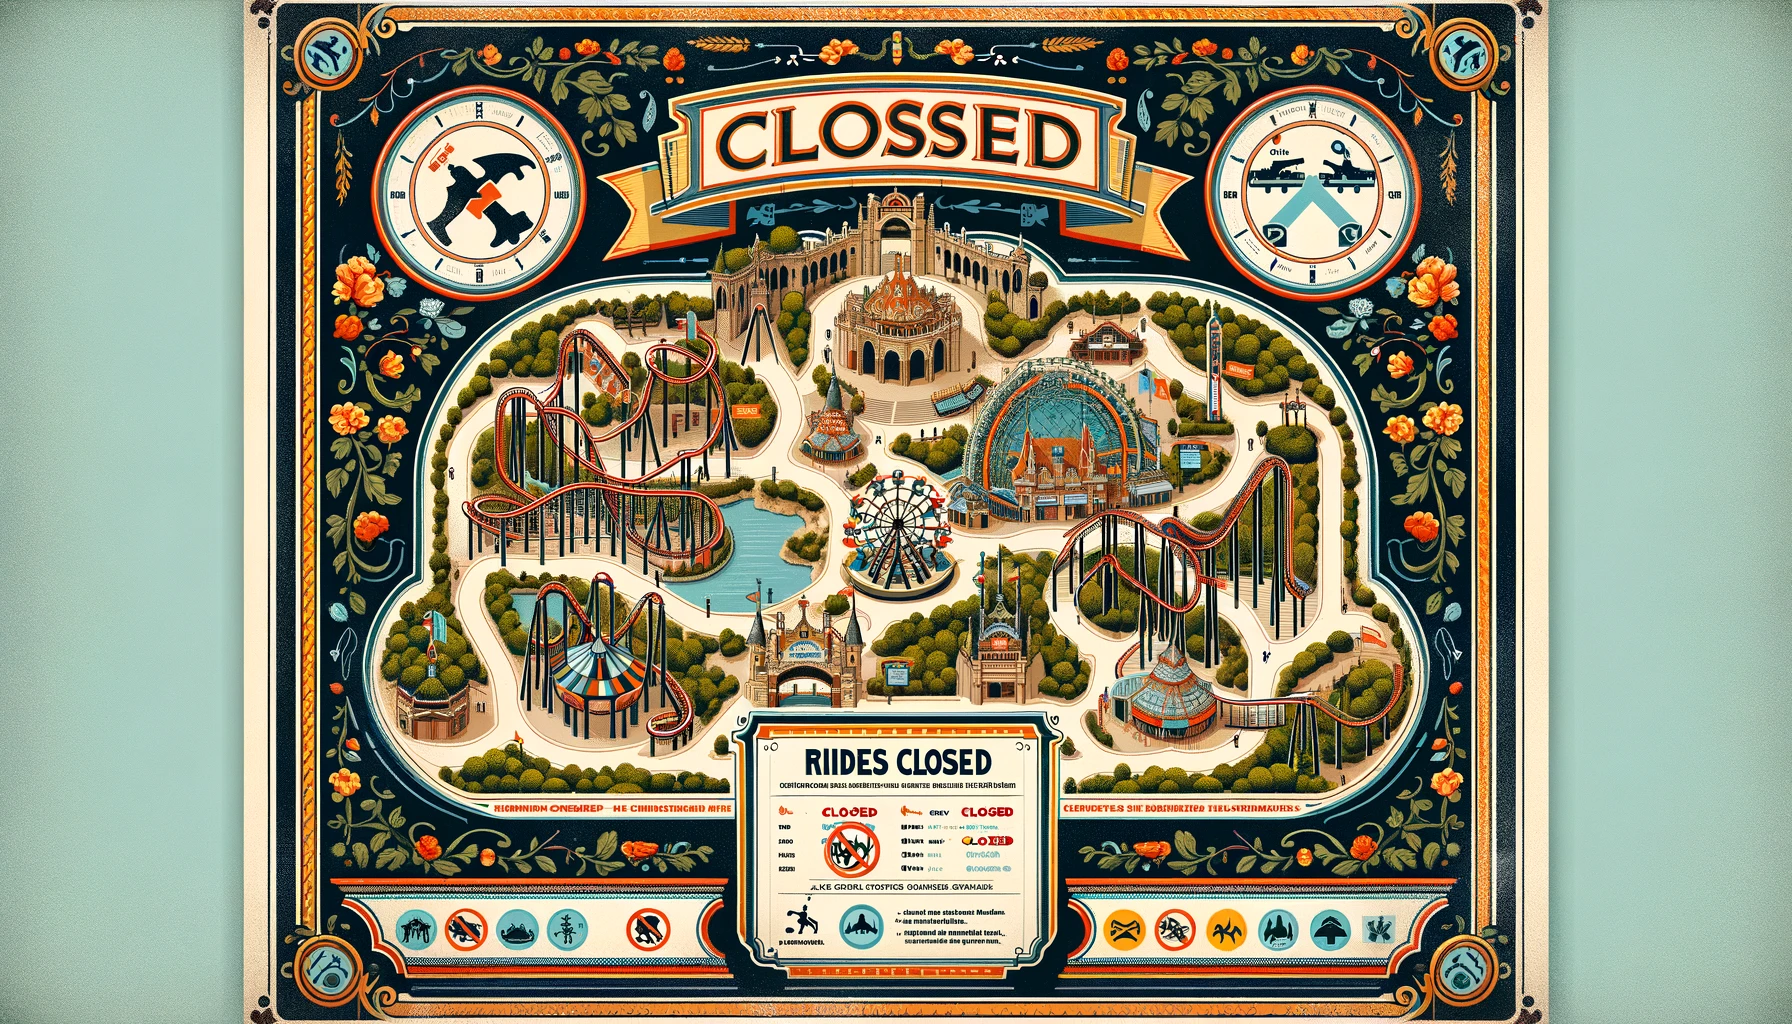 What Rides Are Closed at Busch Gardens Williamsburg?